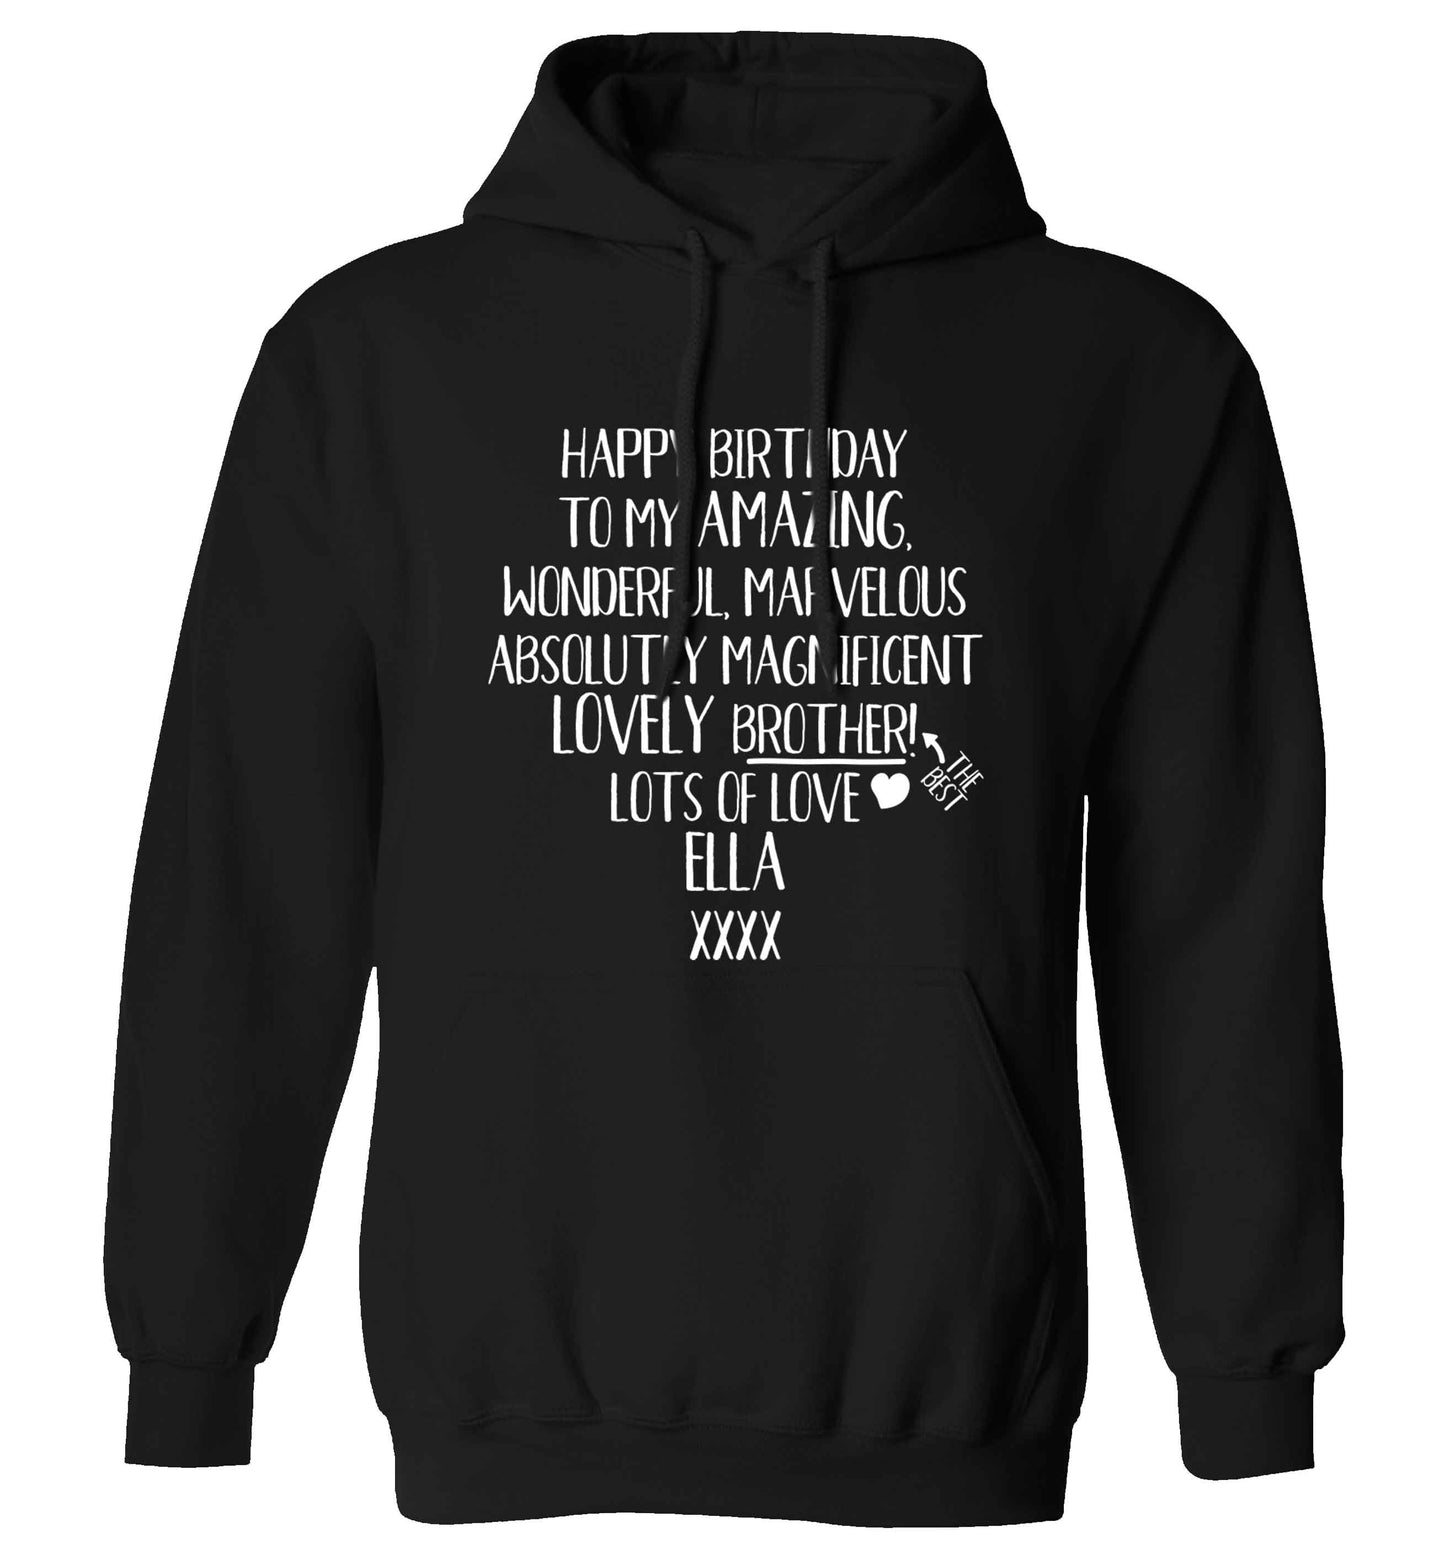 Personalised happy birthday to my amazing, wonderful, lovely brother adults unisex black hoodie 2XL